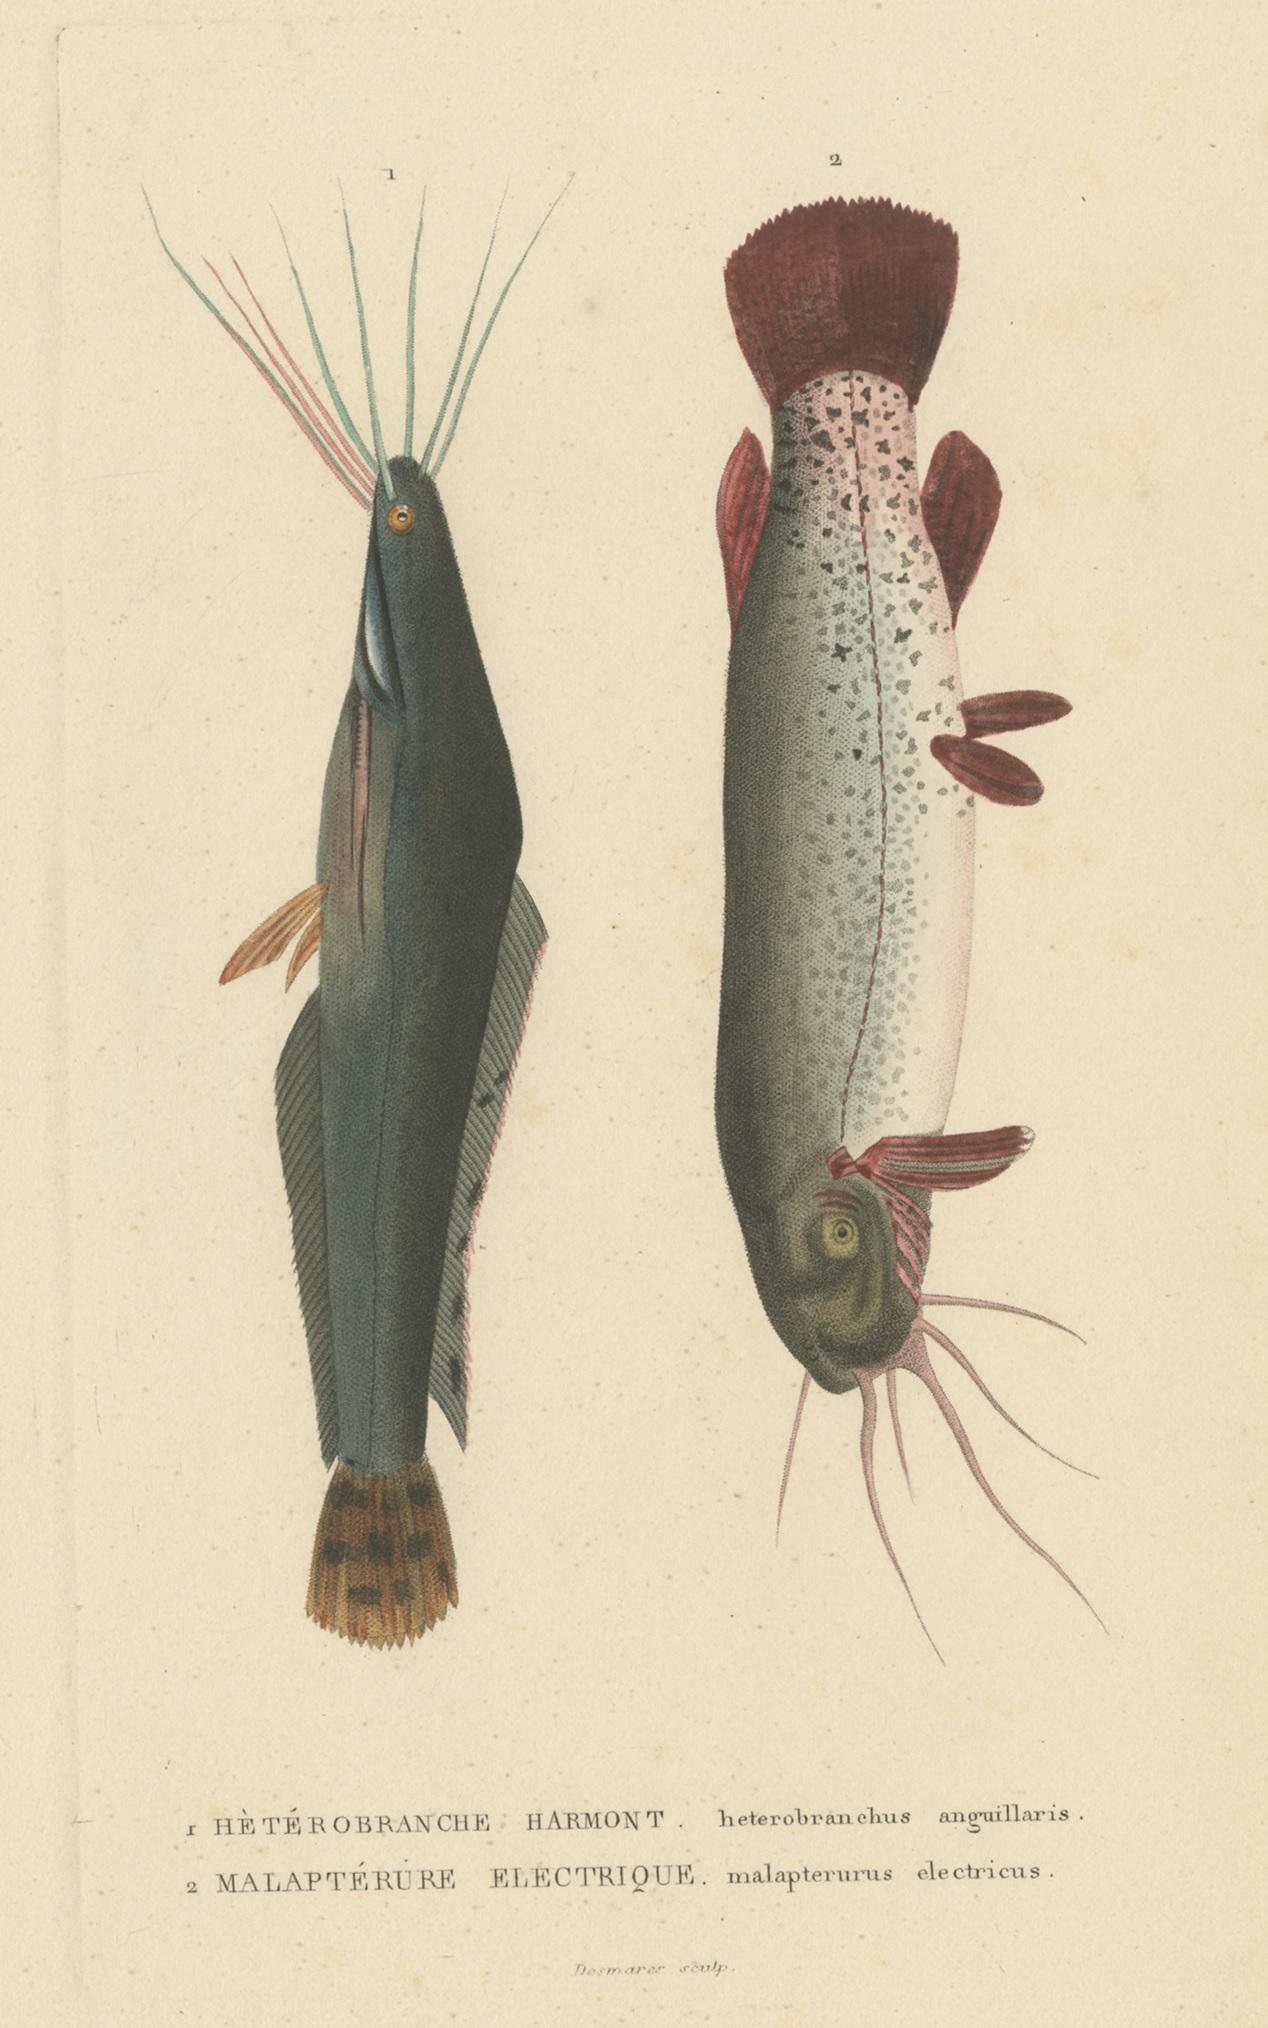 Antique print titled 'Hètérobranche Harmont - Malaptérure Electrique'. This print depicts the heterobranchus bidorsalis (the African catfish or eel-like fattyfin catfish) and malapterurus electricus, a species of electric catfish. This print